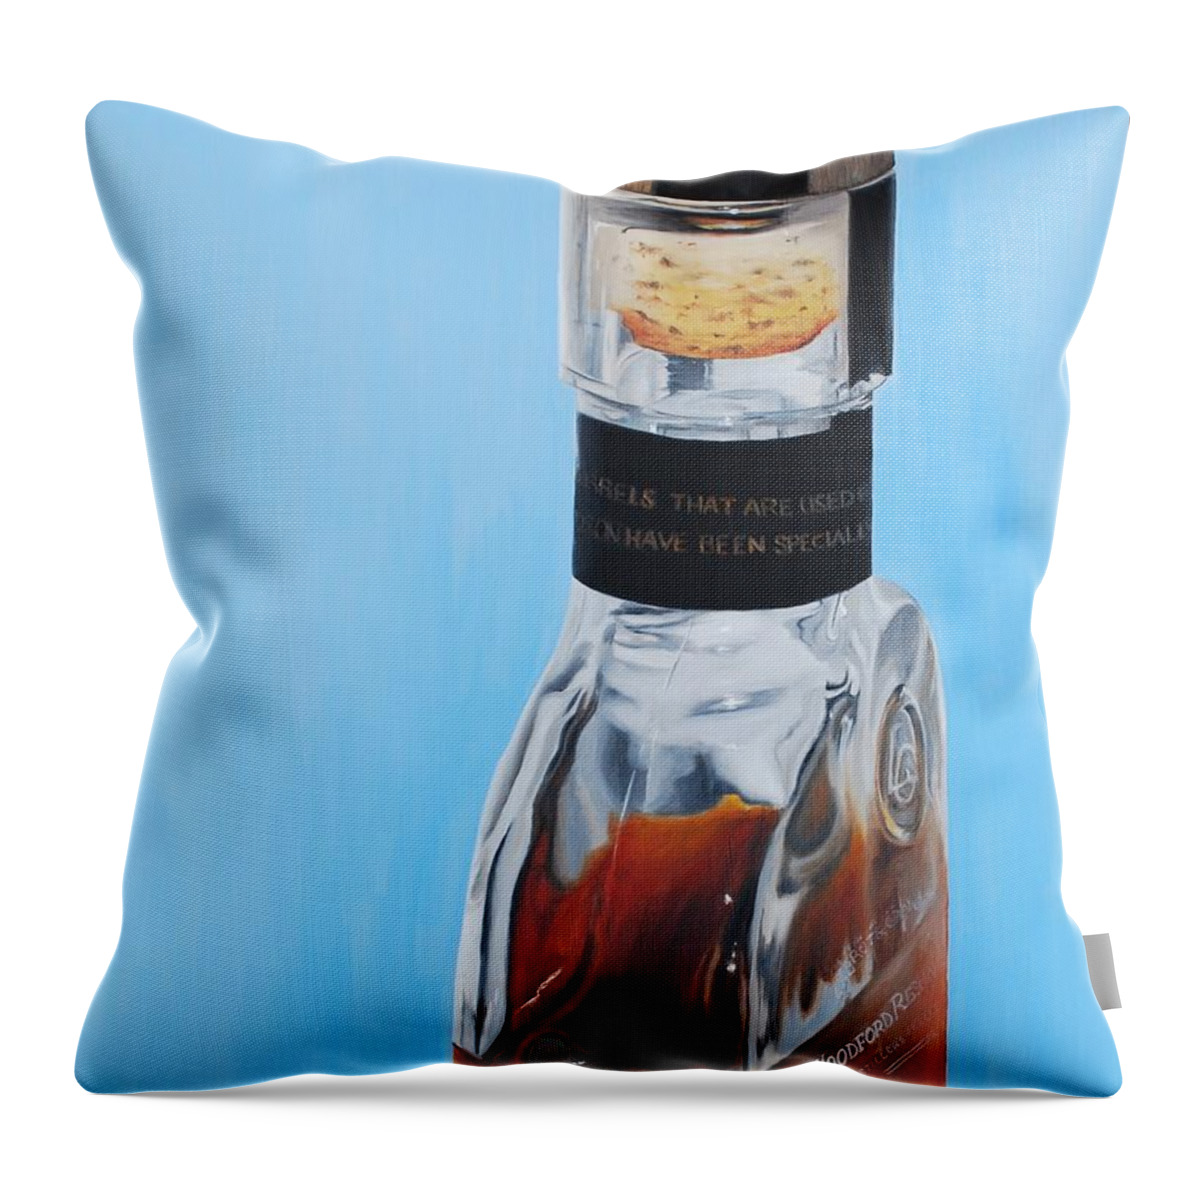 Bourbon Throw Pillow featuring the painting Woodford Reserve by Emily Page